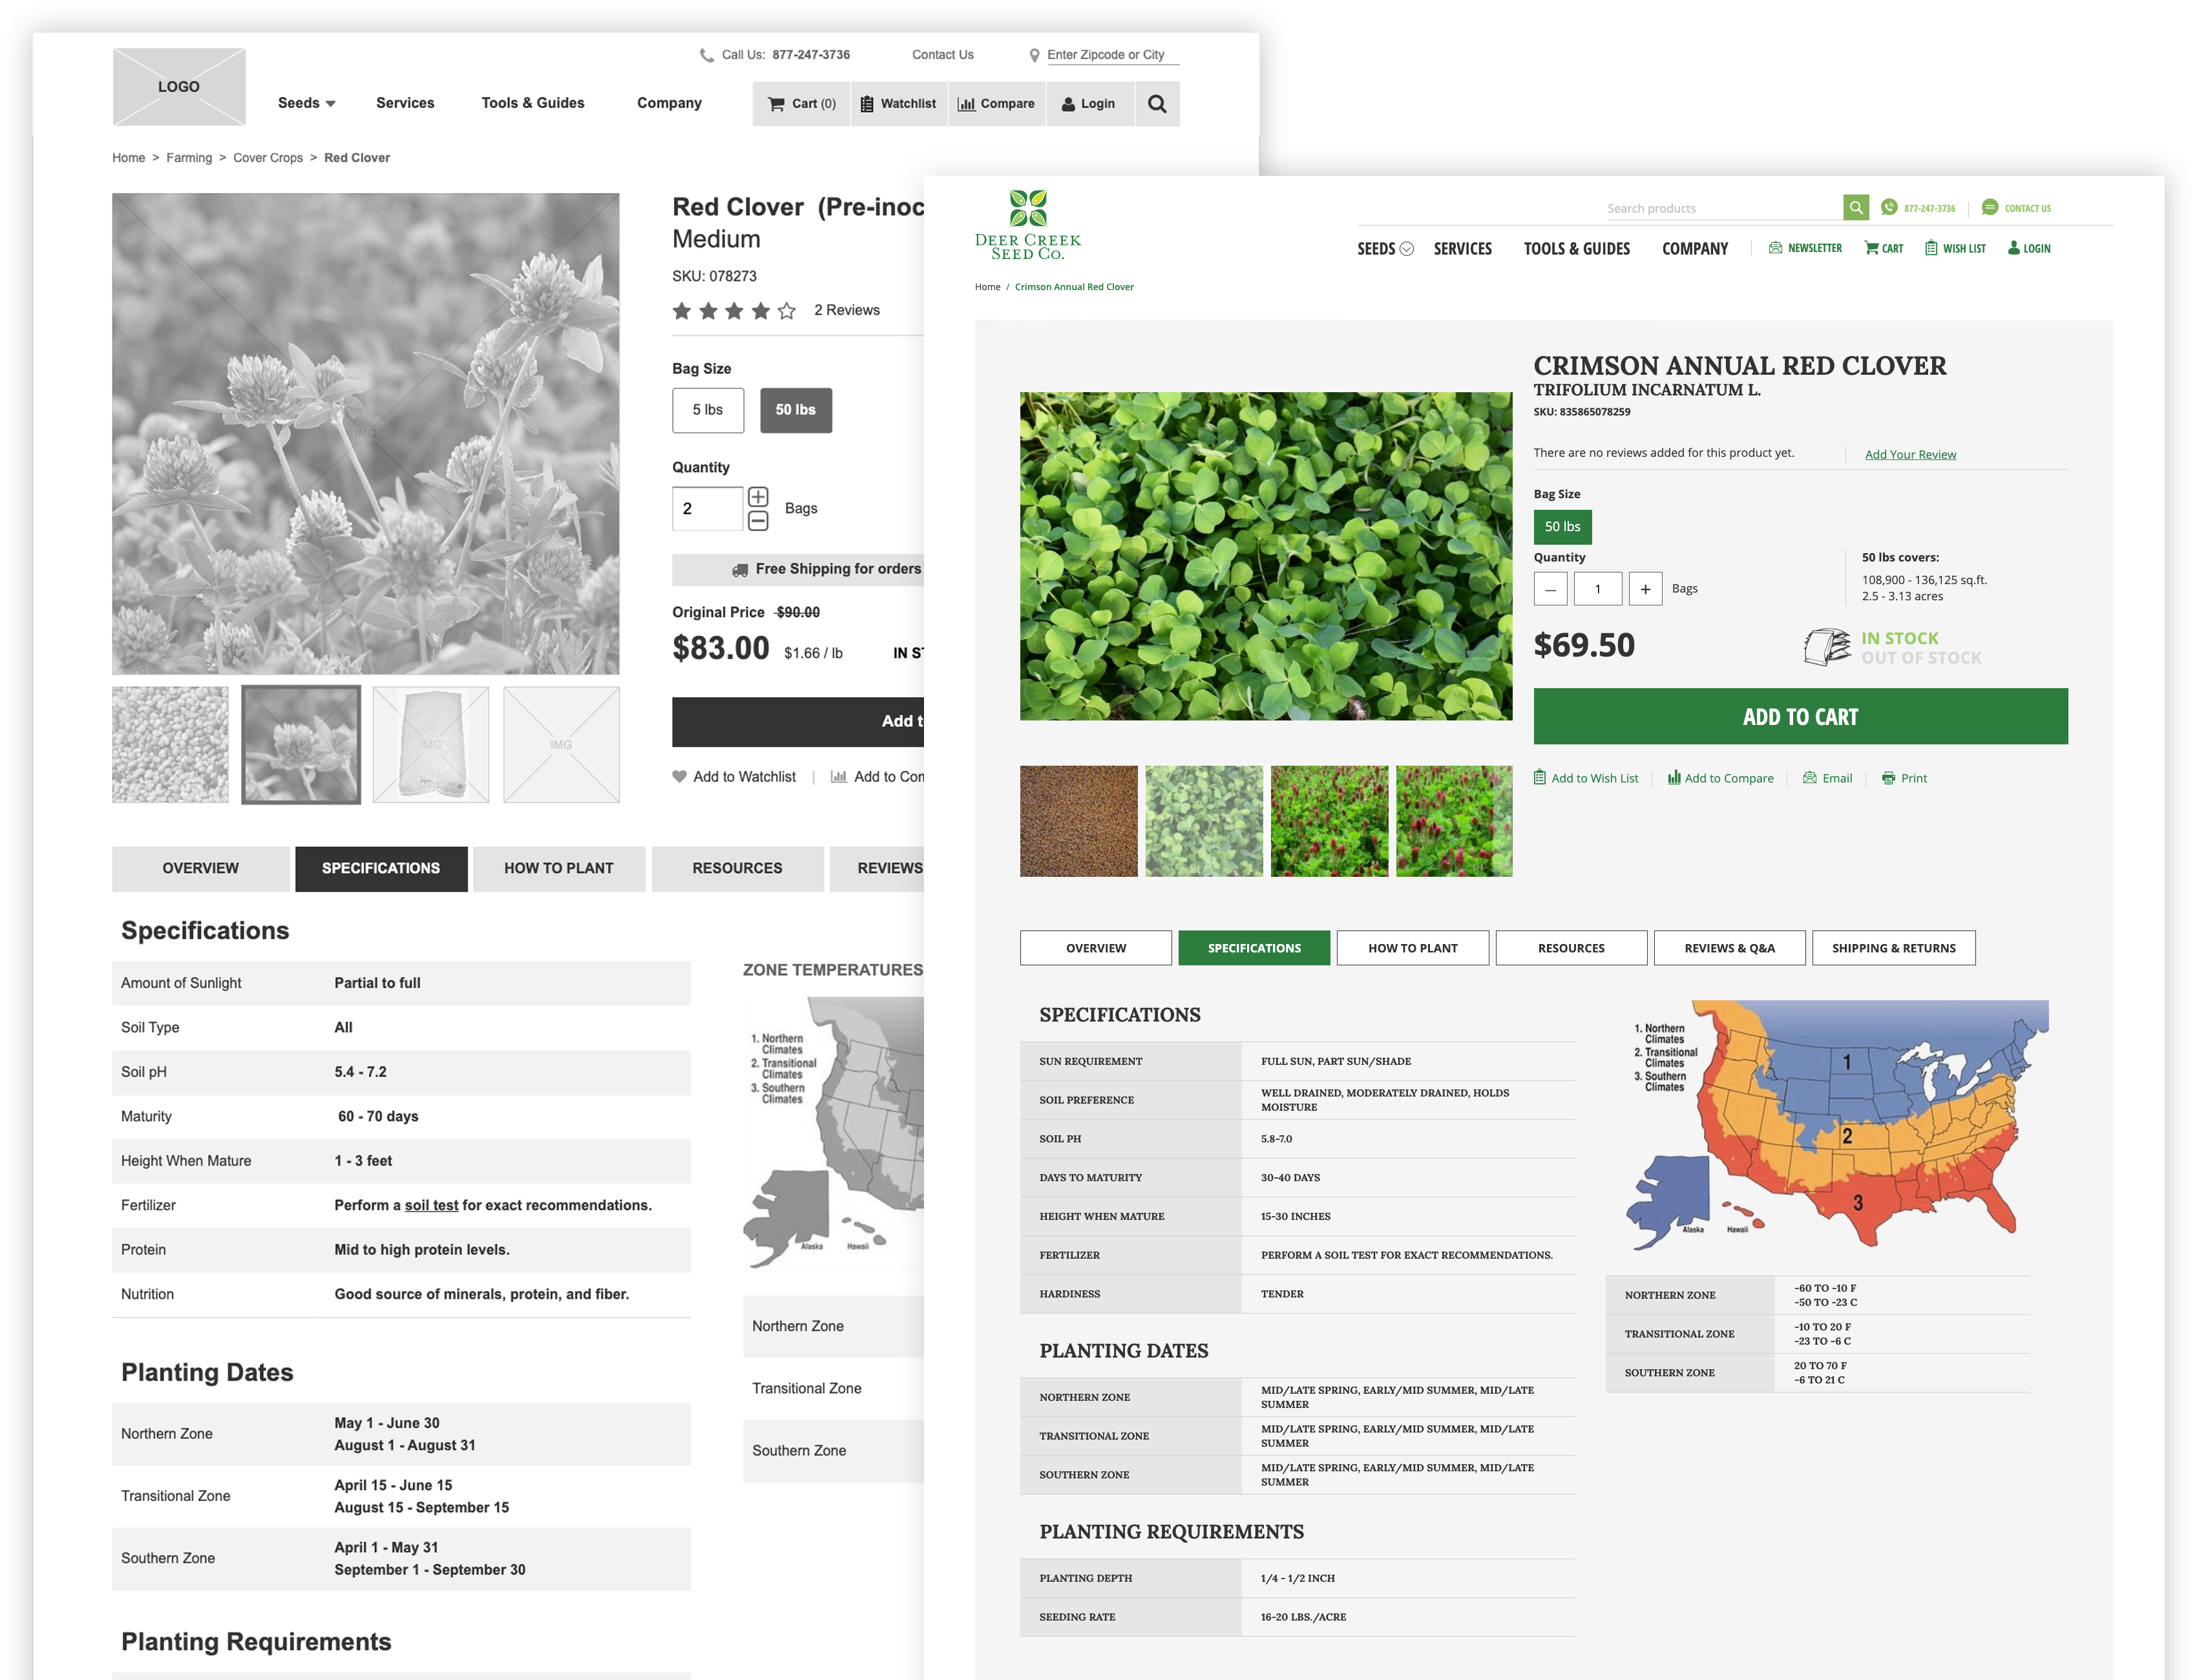 Product detail page with specification table and temperature zone map of the US for reference.